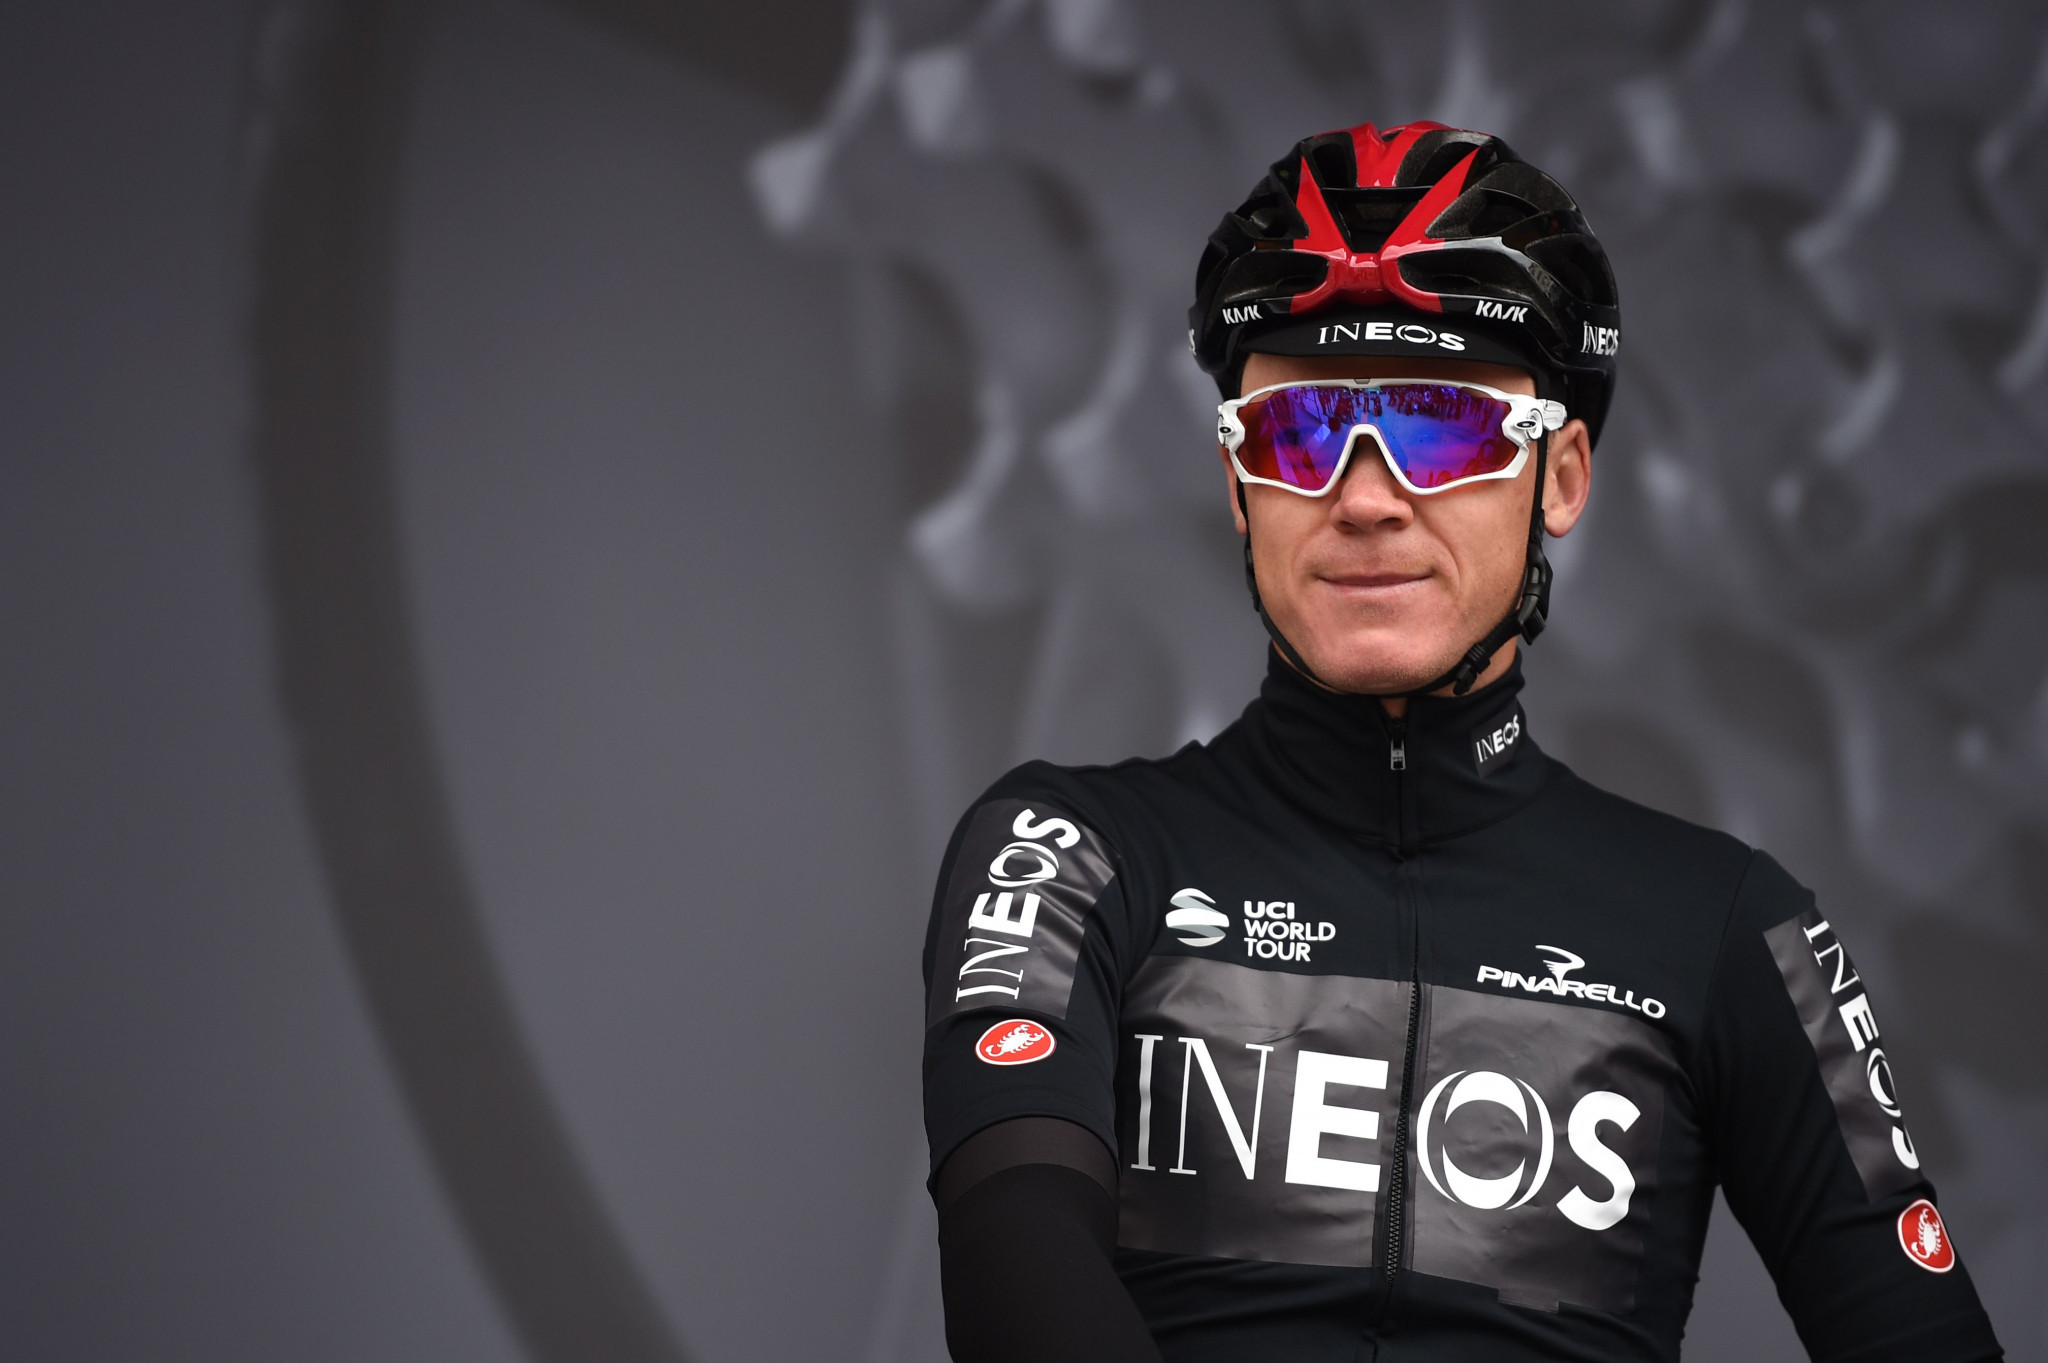 Team Ineos rider Chris Froome is bidding to win the Critérium du Dauphiné for a fifth time ©Getty Images